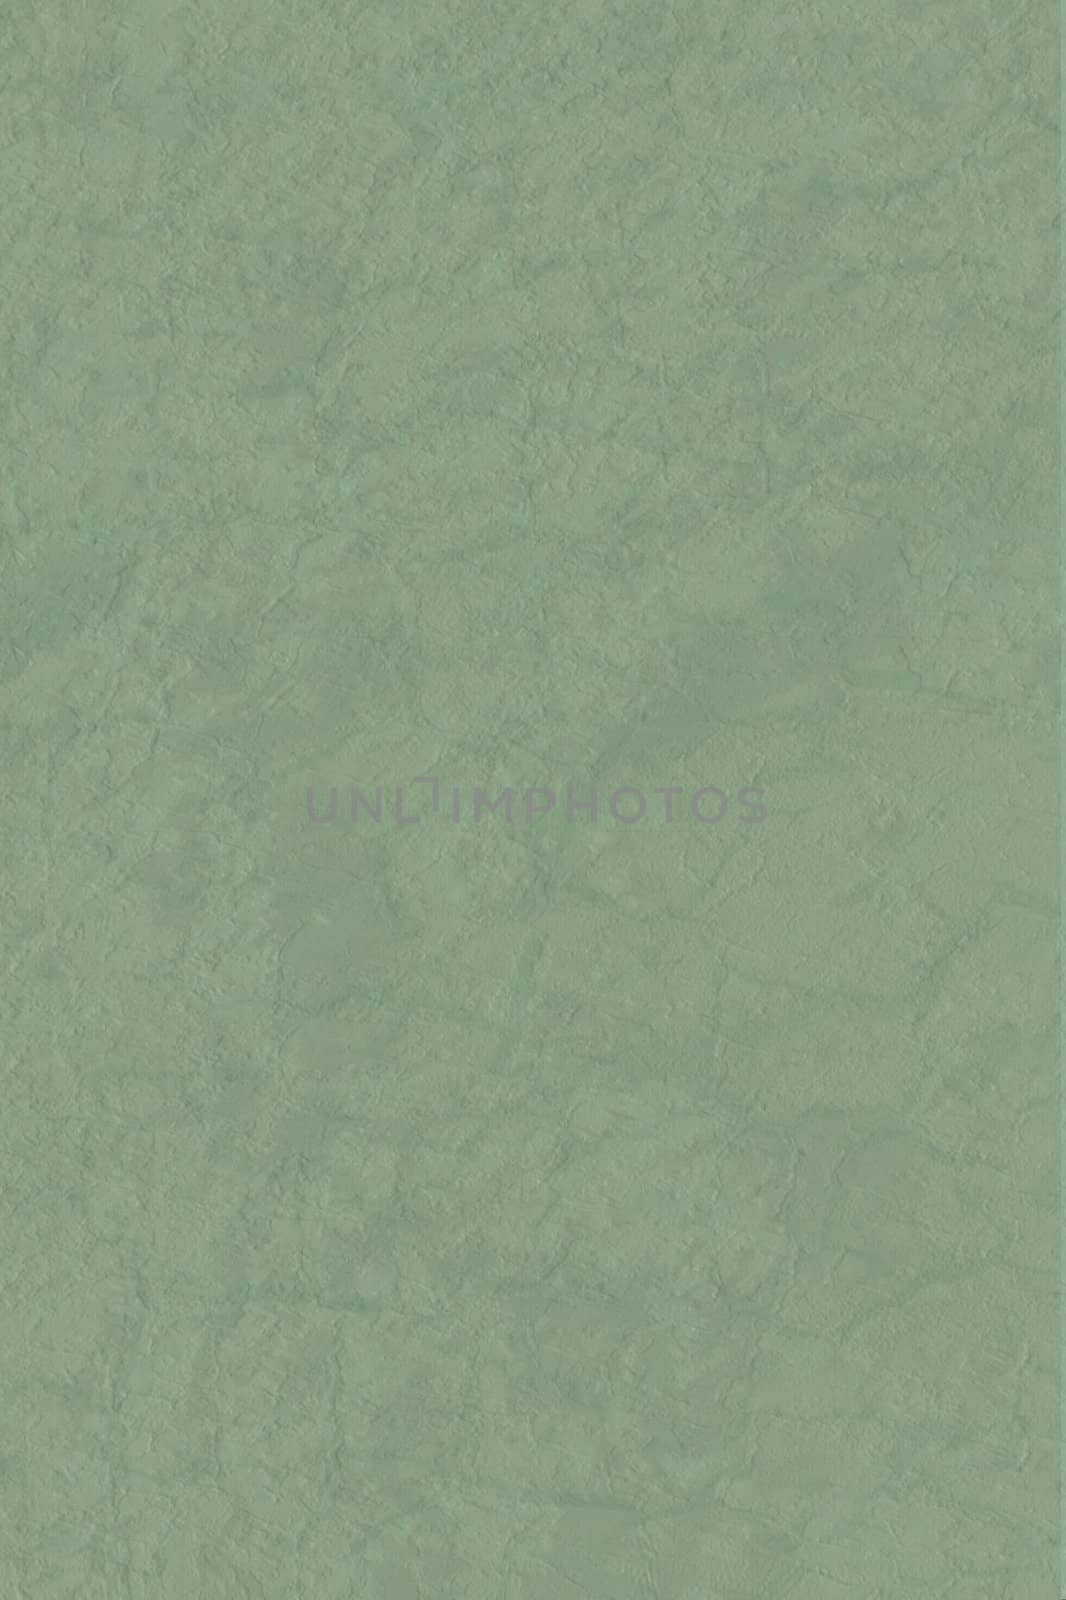 Abstract textured light green background